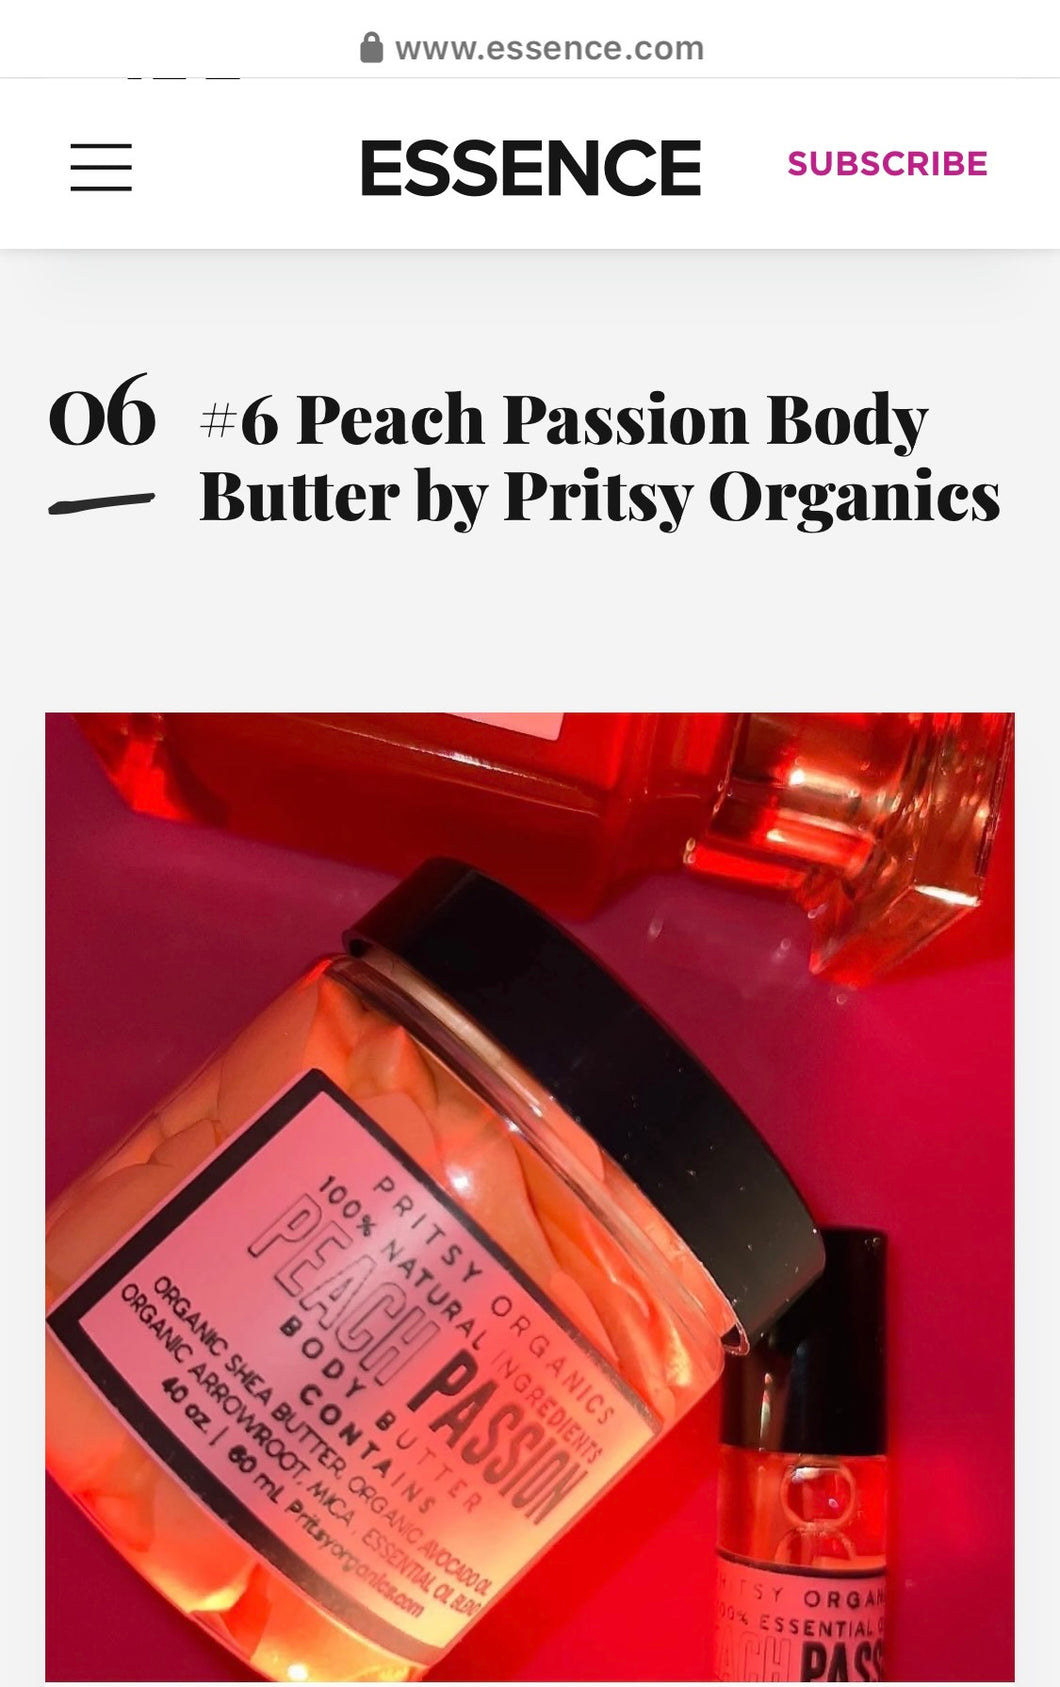 Pritsy Organics is a luxurious designer inspired organic and vegan skincare line! Some of the top sellers of this organic brand are Desi-inspired whipped body butter, sugar scrubs, and roll-on oils. Since its inception, they have become the hottest new organic skincare business. 